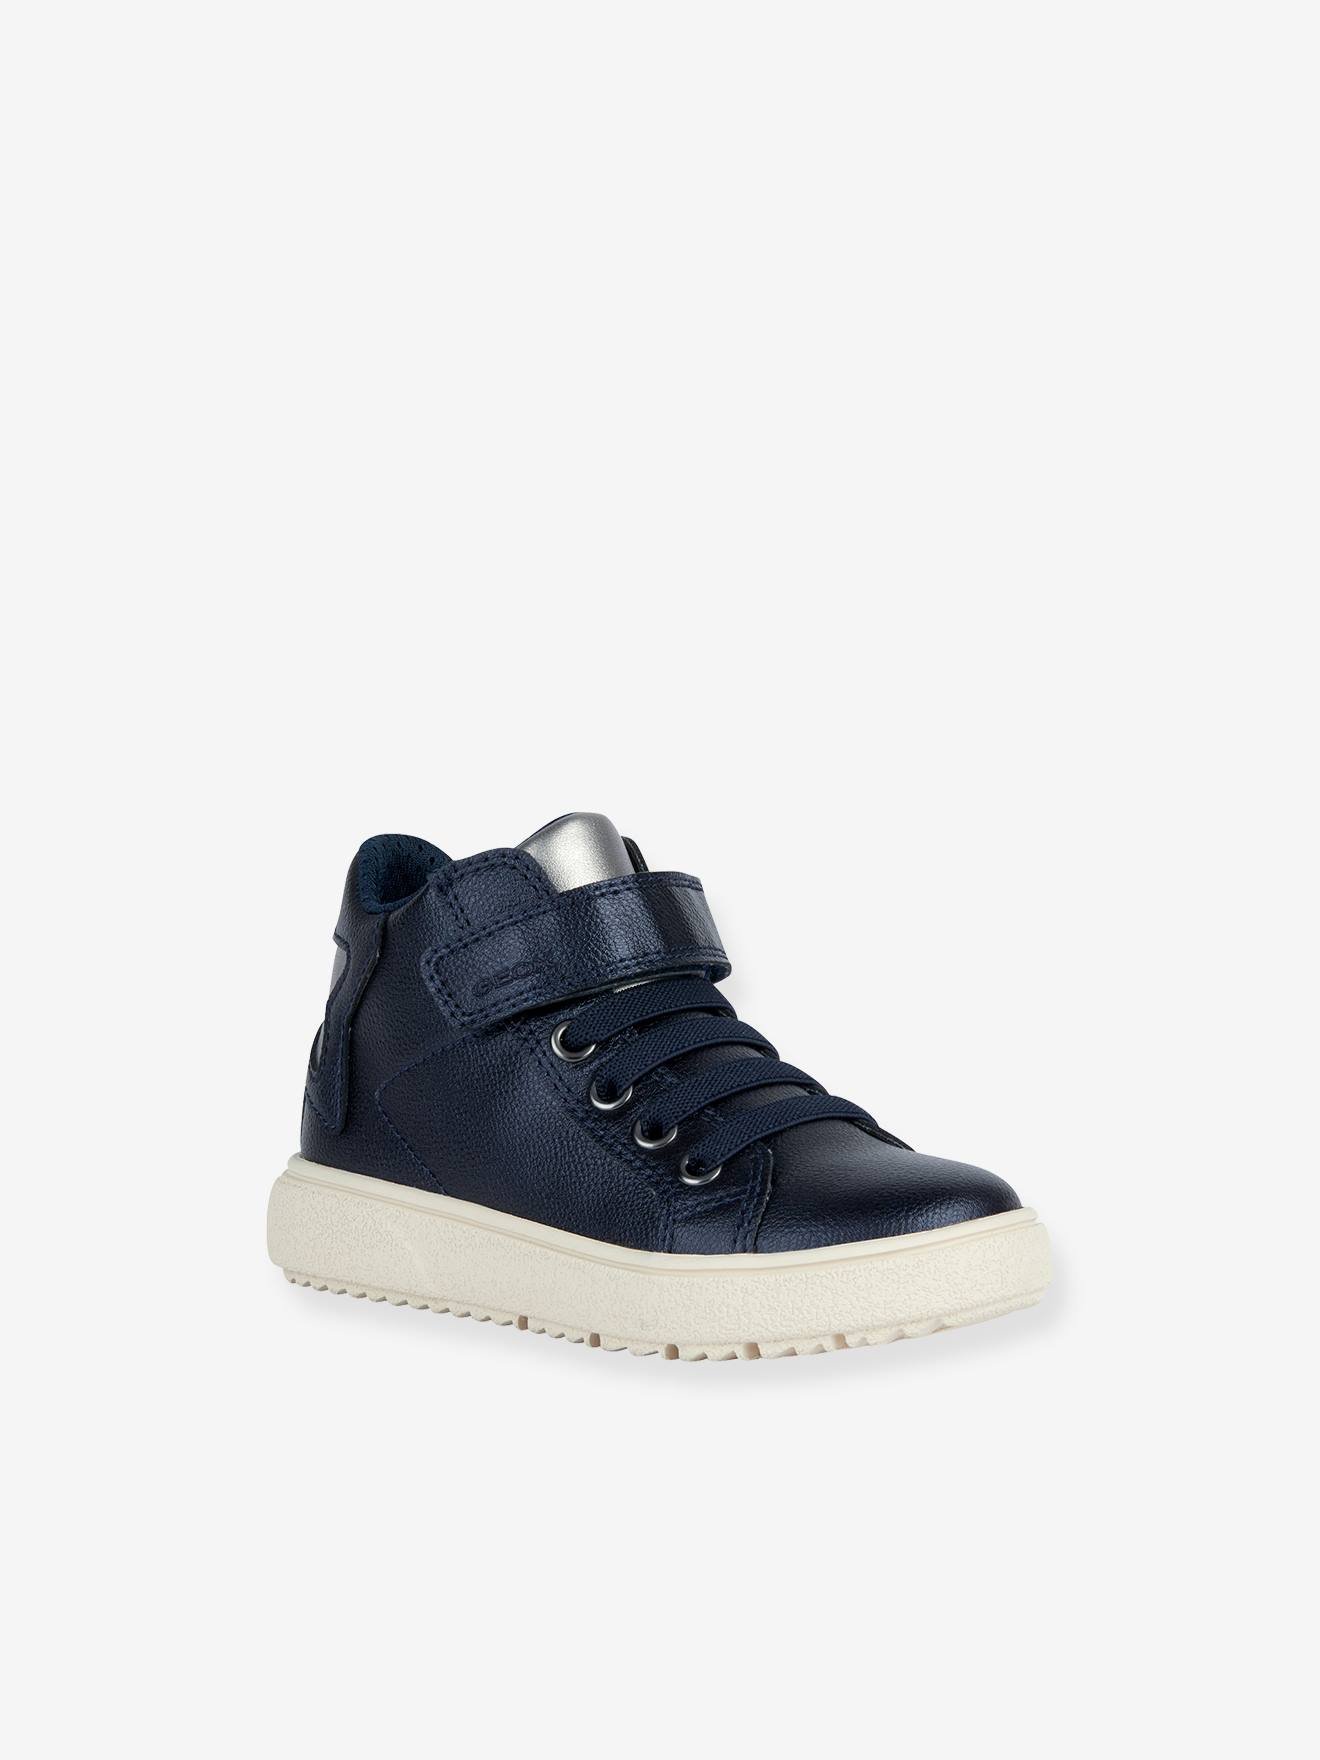 High-Top Trainers with Laces & Hook-&-Loop Strap, J Theleven Girl by GEOX(r) navy blue